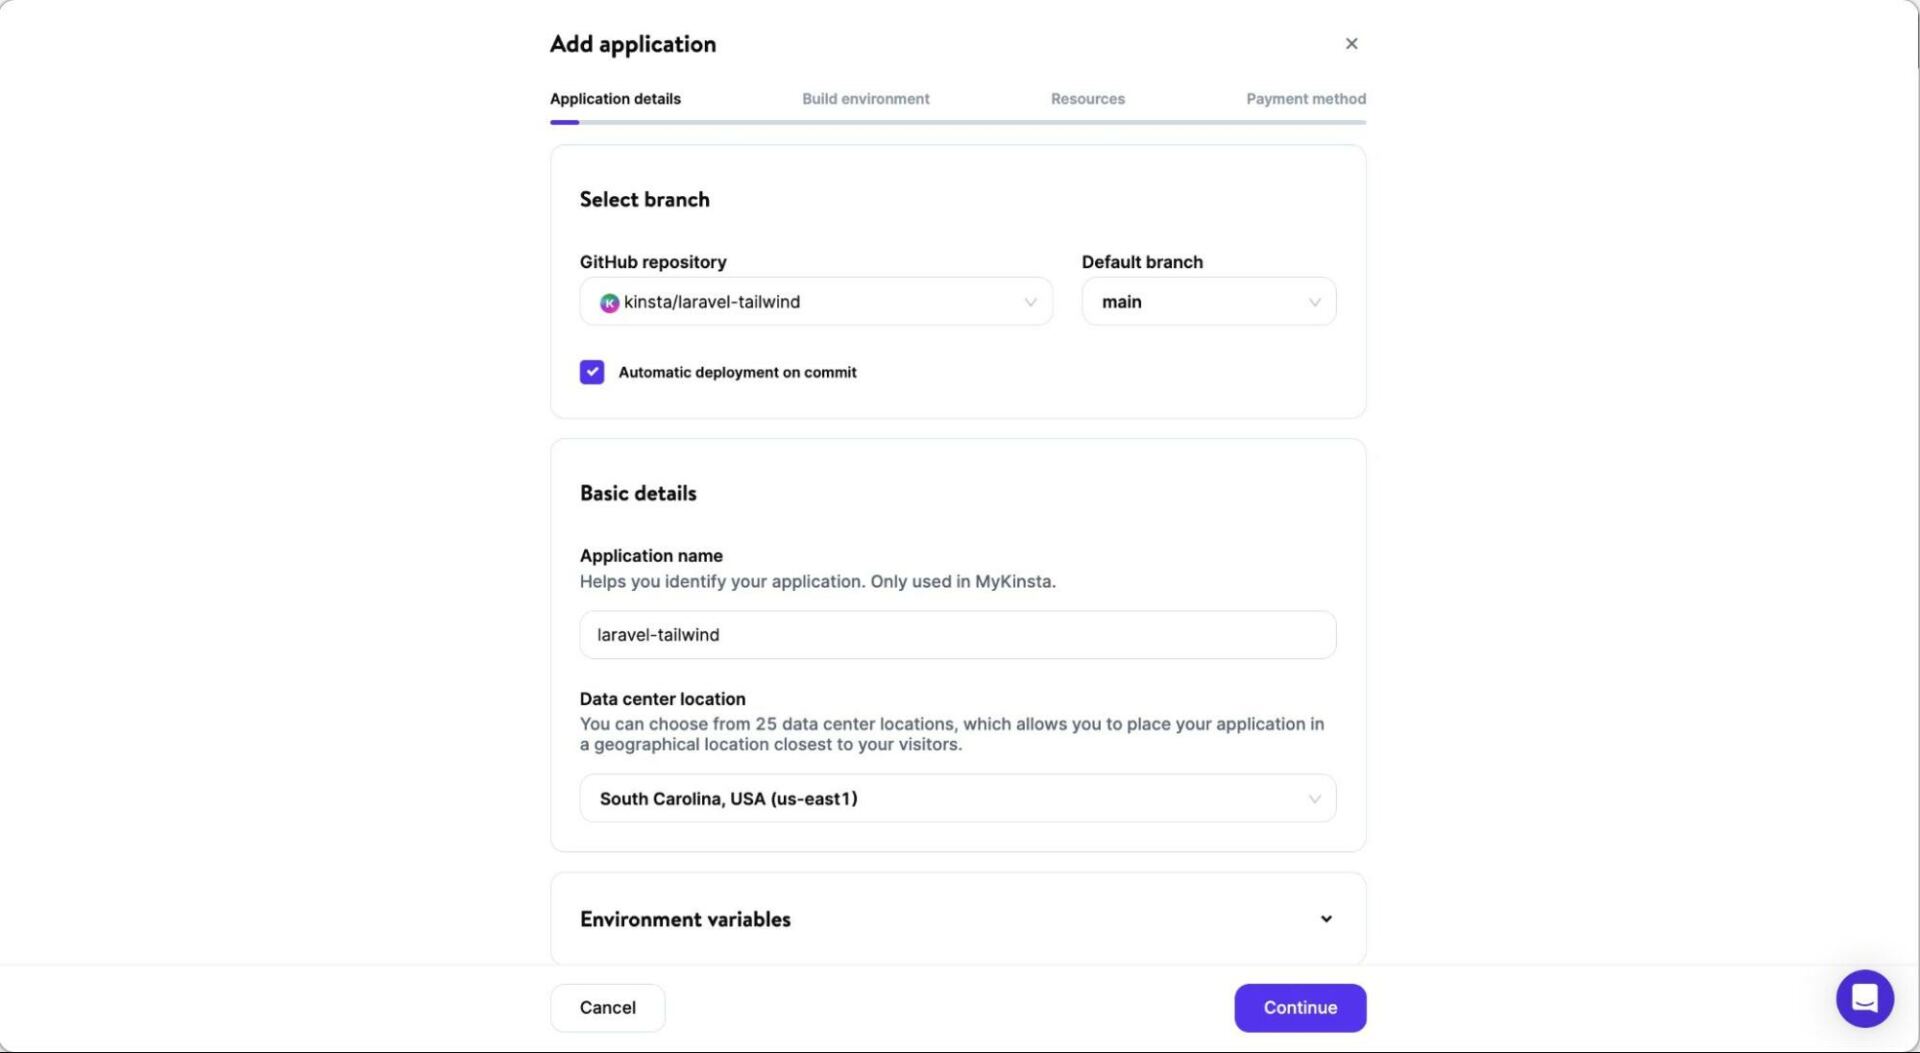 Configuring new application details on Kinsta